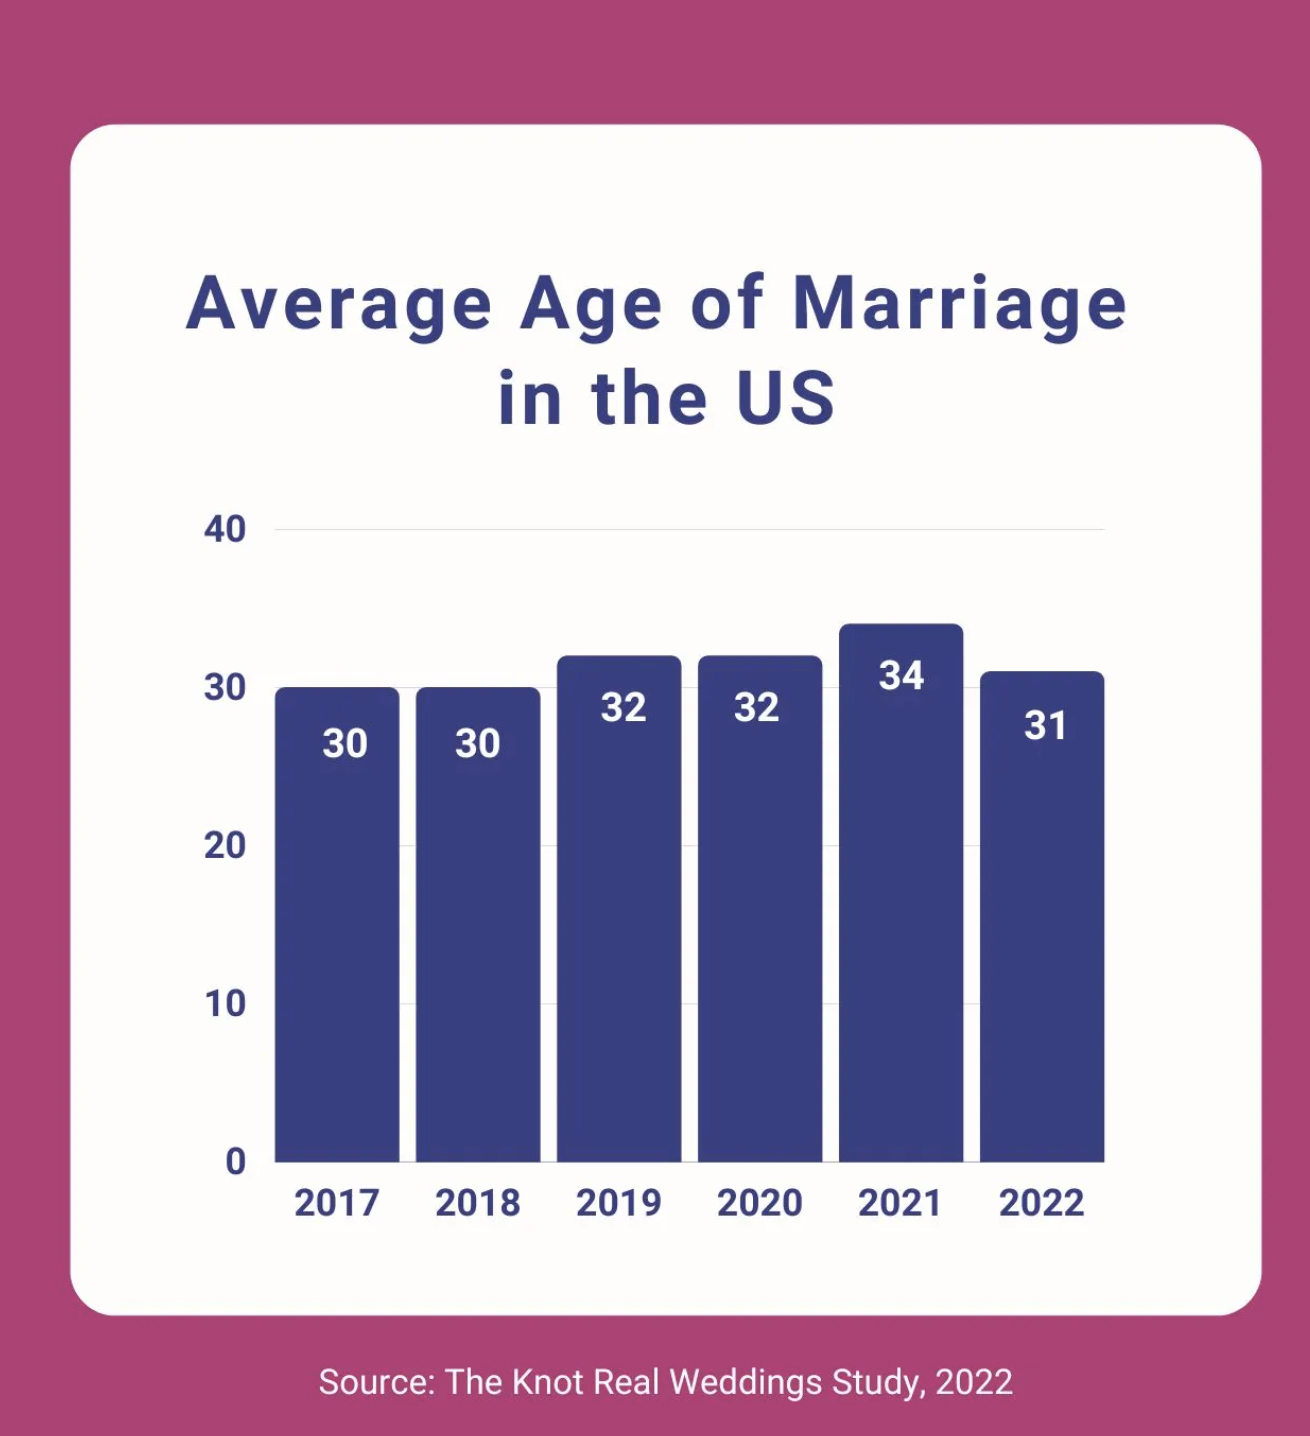 Chart showing the average age of marriage in the US increasing from 30 in 2017 to 34 in 2022